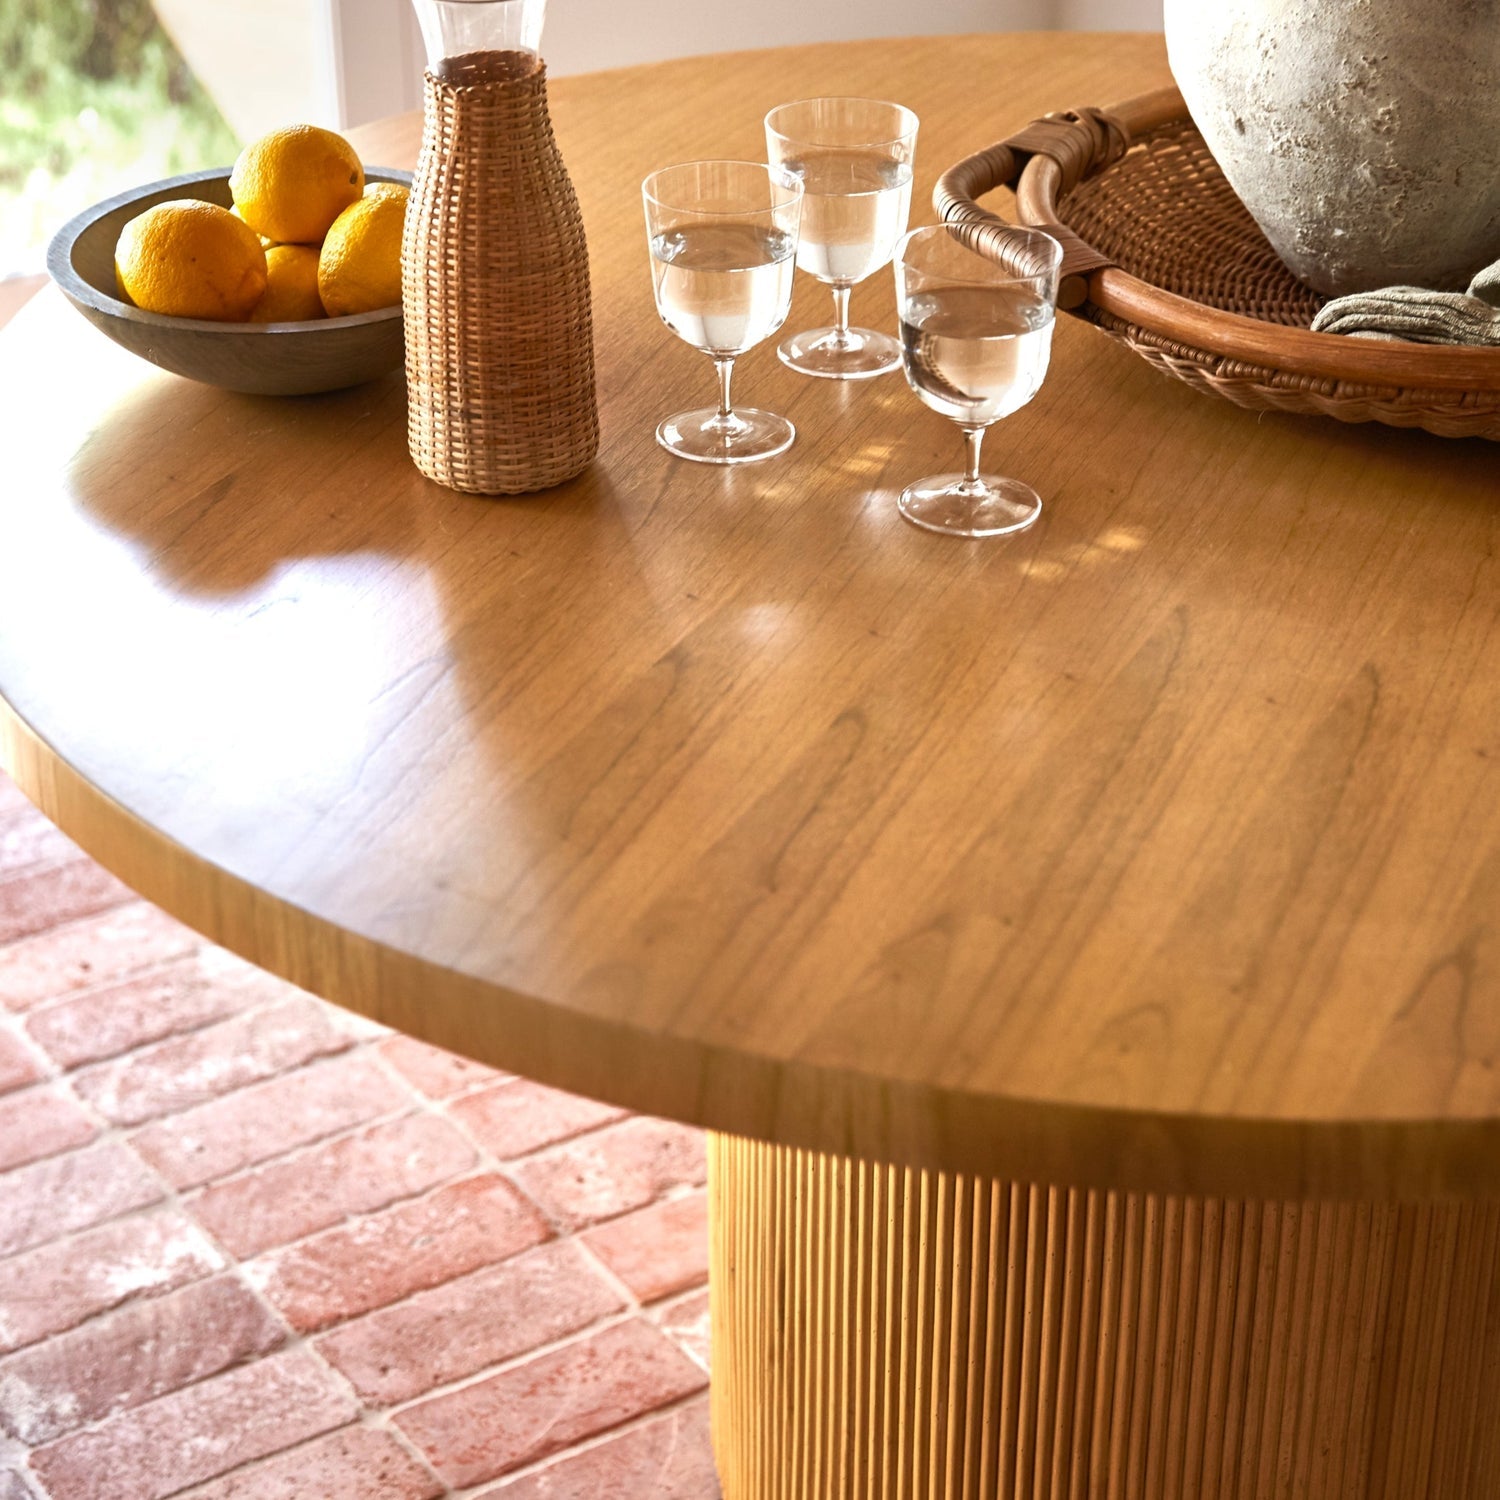 On a neutral background is a round wood table with a round fluted base.